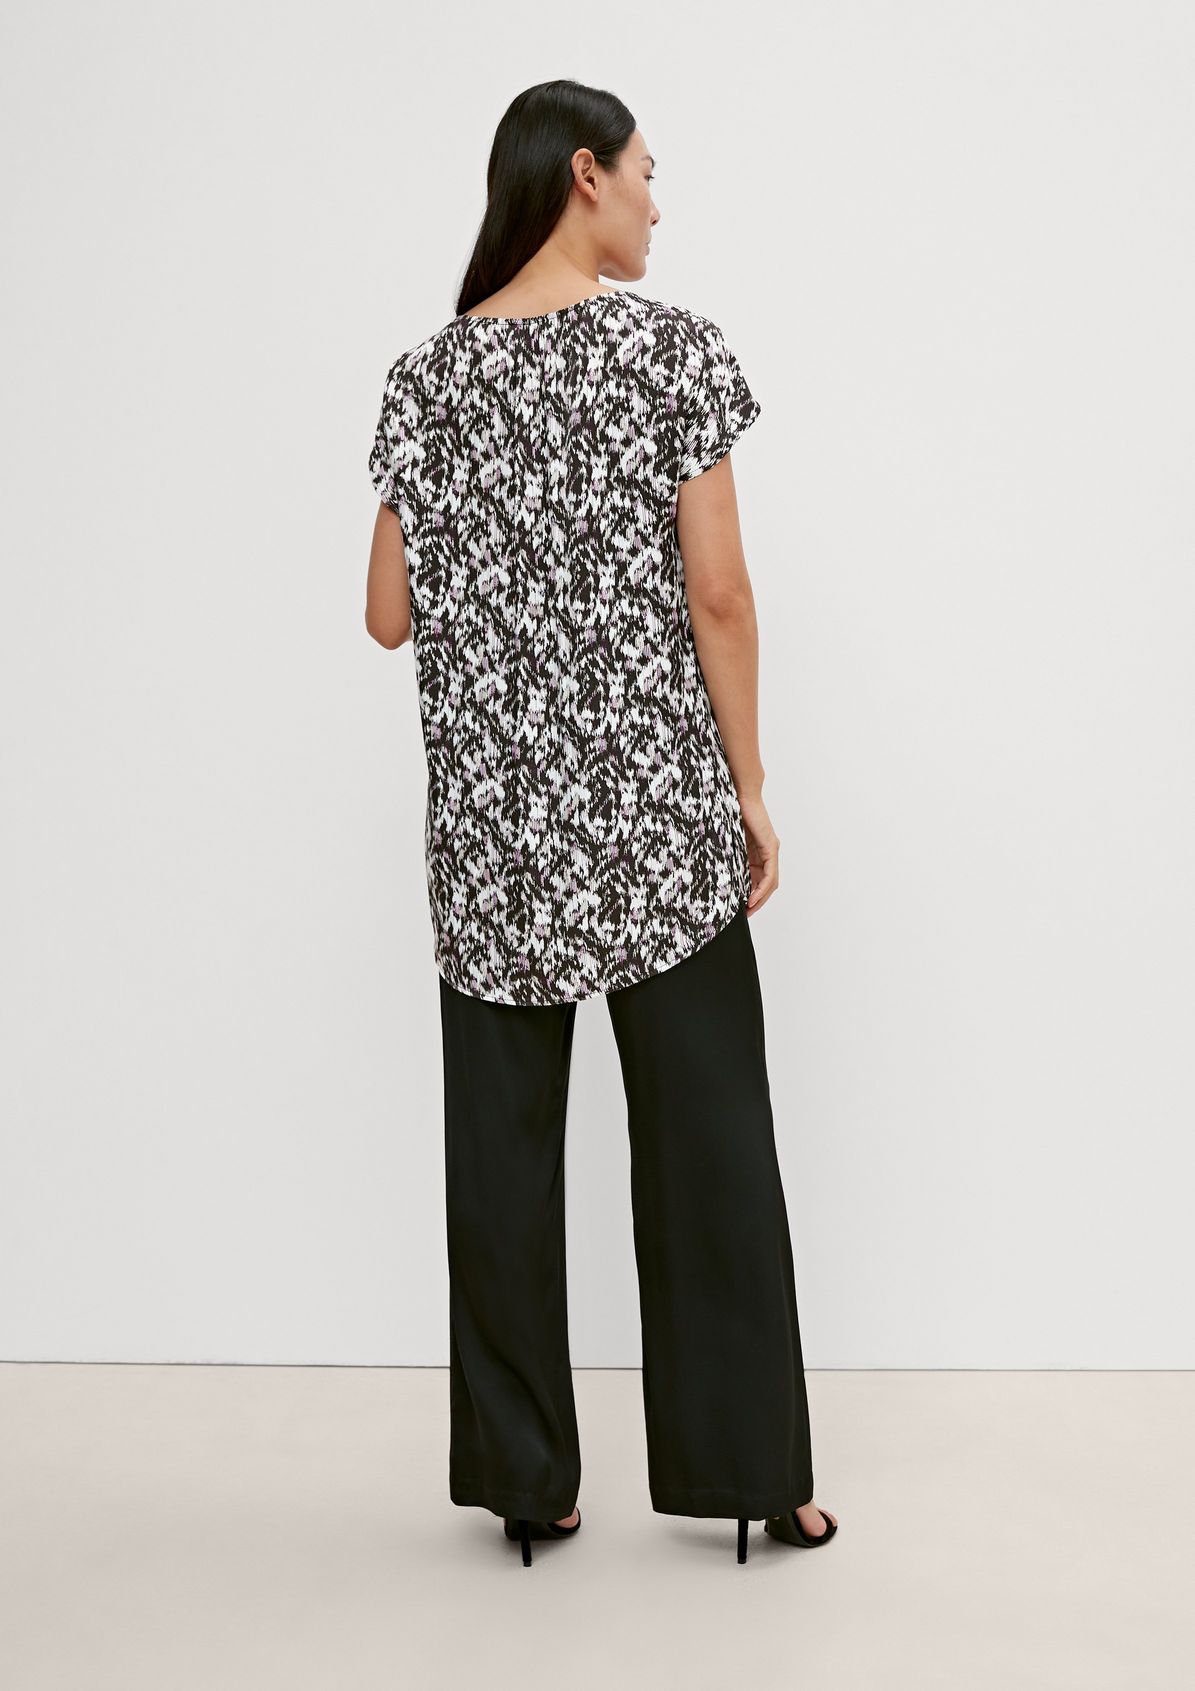 Viscose blouse top from comma